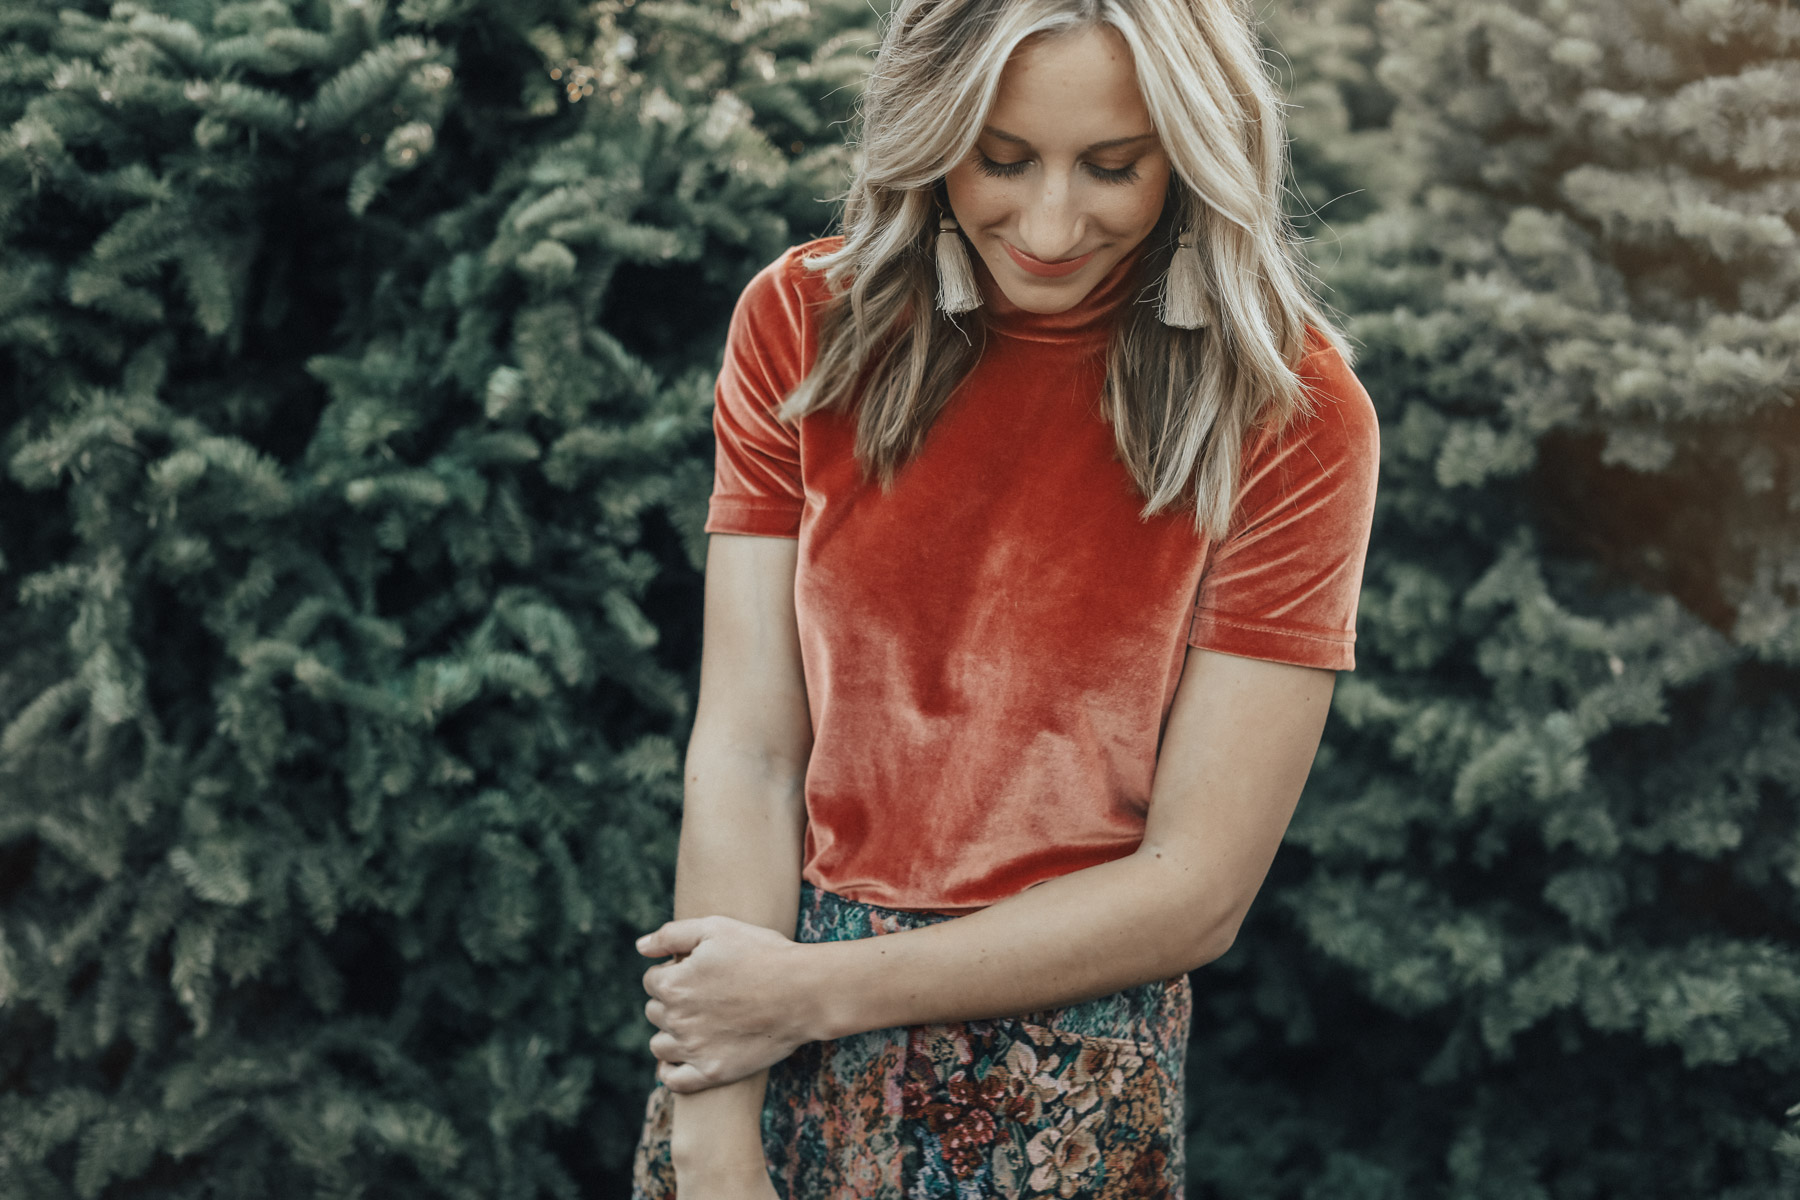 madewell velvet top and urban outfitters jacquard mini skirt holiday outfit